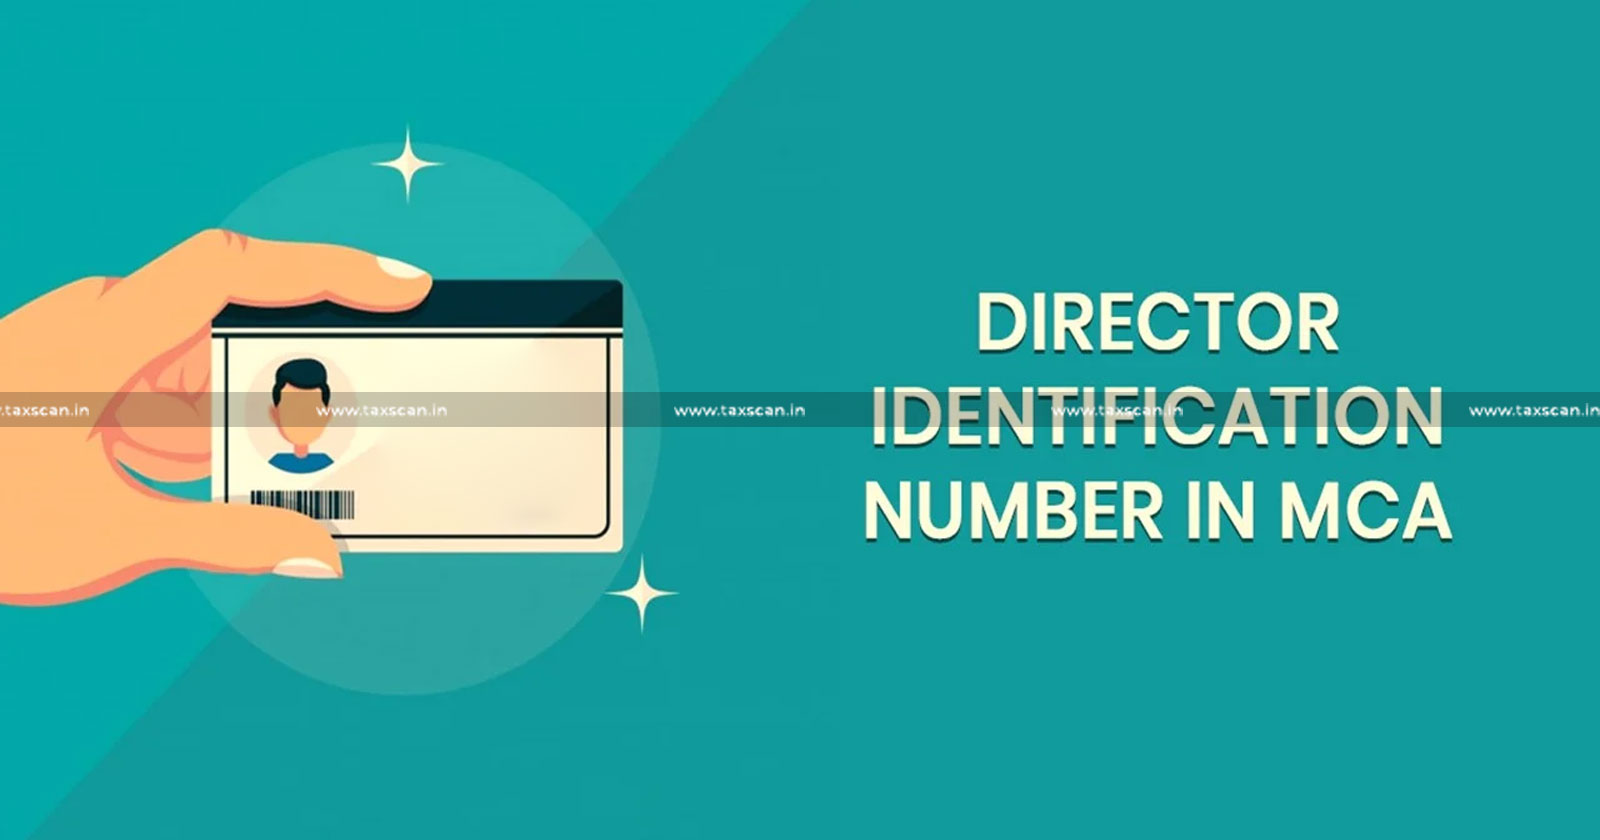 issuance - DIN - insignificant - communication - ITAT - director - identification - number - din number - taxcan